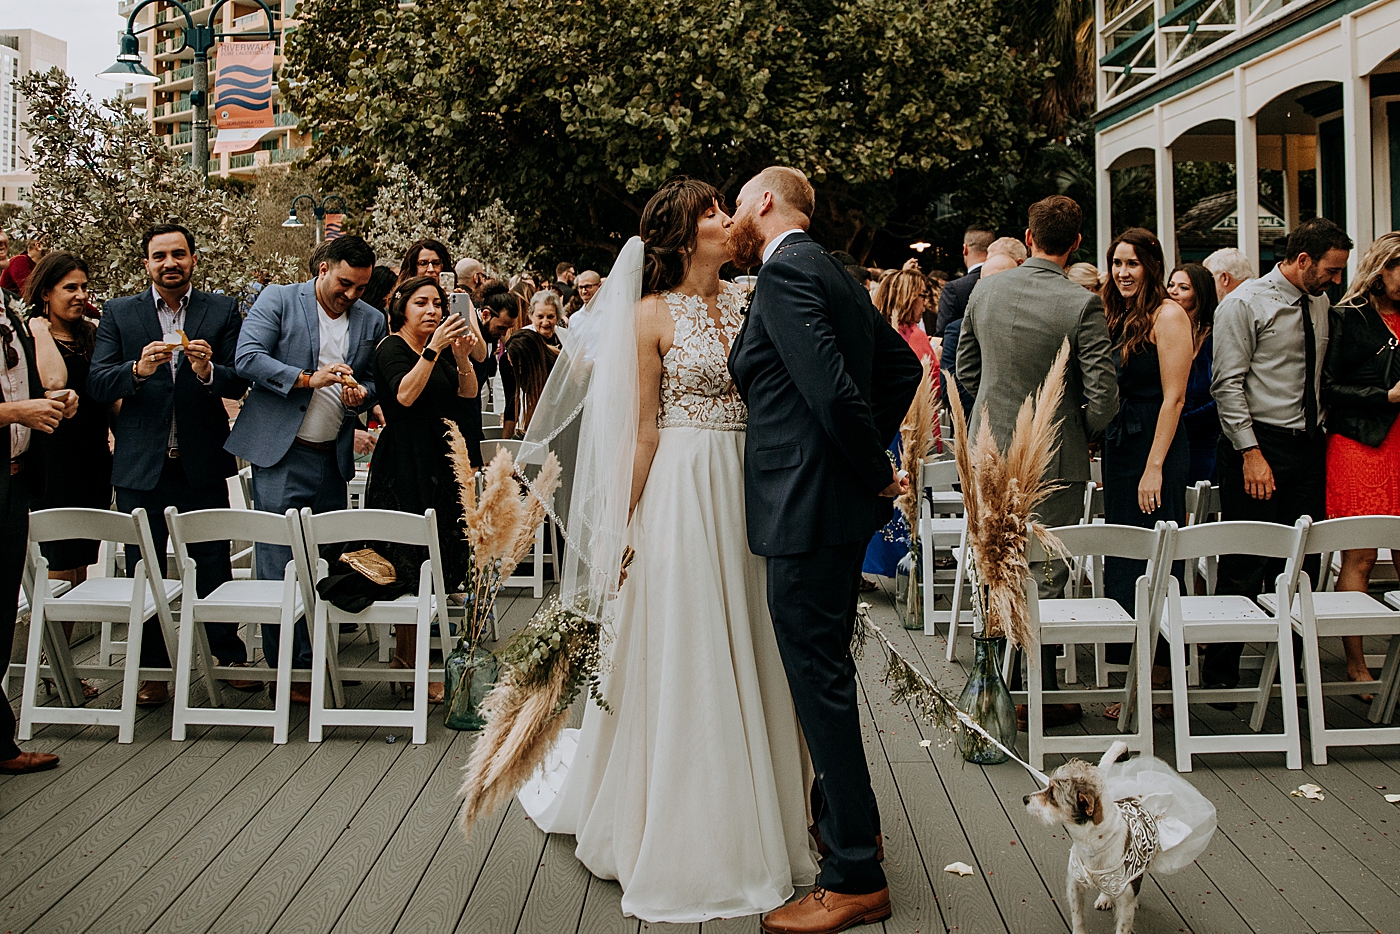 Bride and Groom kissing each other with wedding dog Historic Stranahan House Wedding Photography captured by South Florida Wedding Photographer Maggie Alvarez Photography